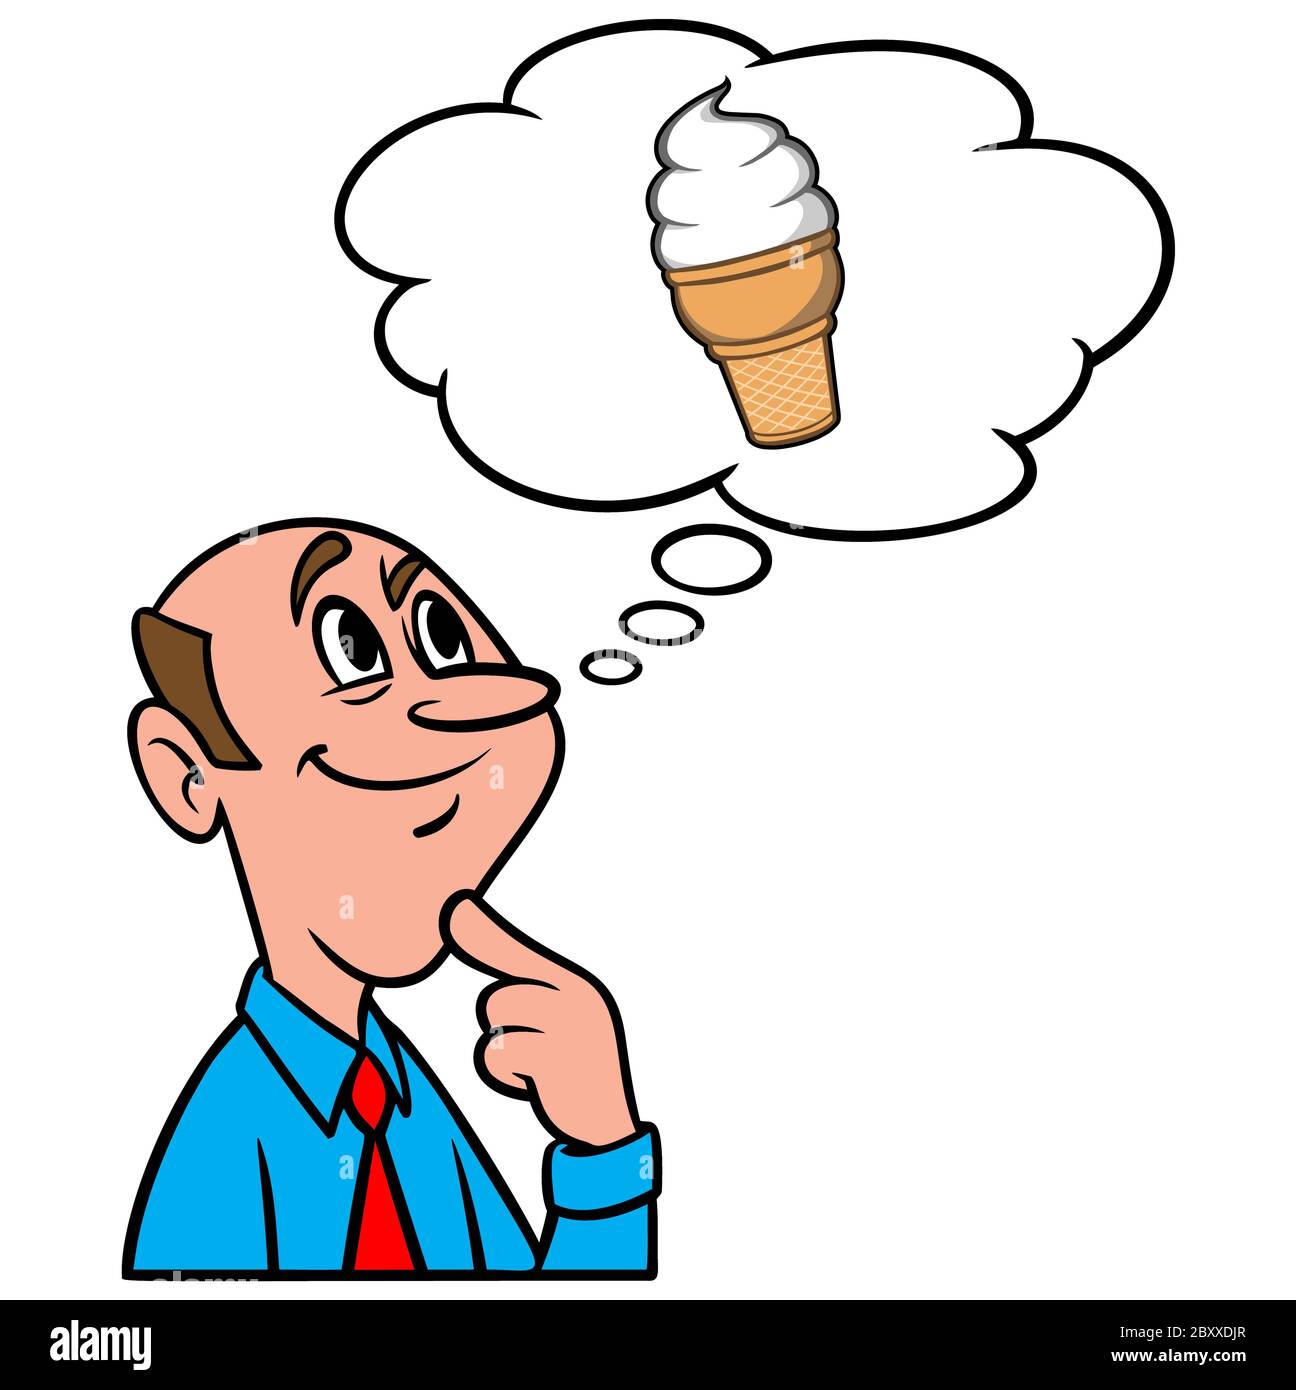 Thinking About Ice Cream- An Illustration of a person Thinking About Ice Cream. Stock Vector